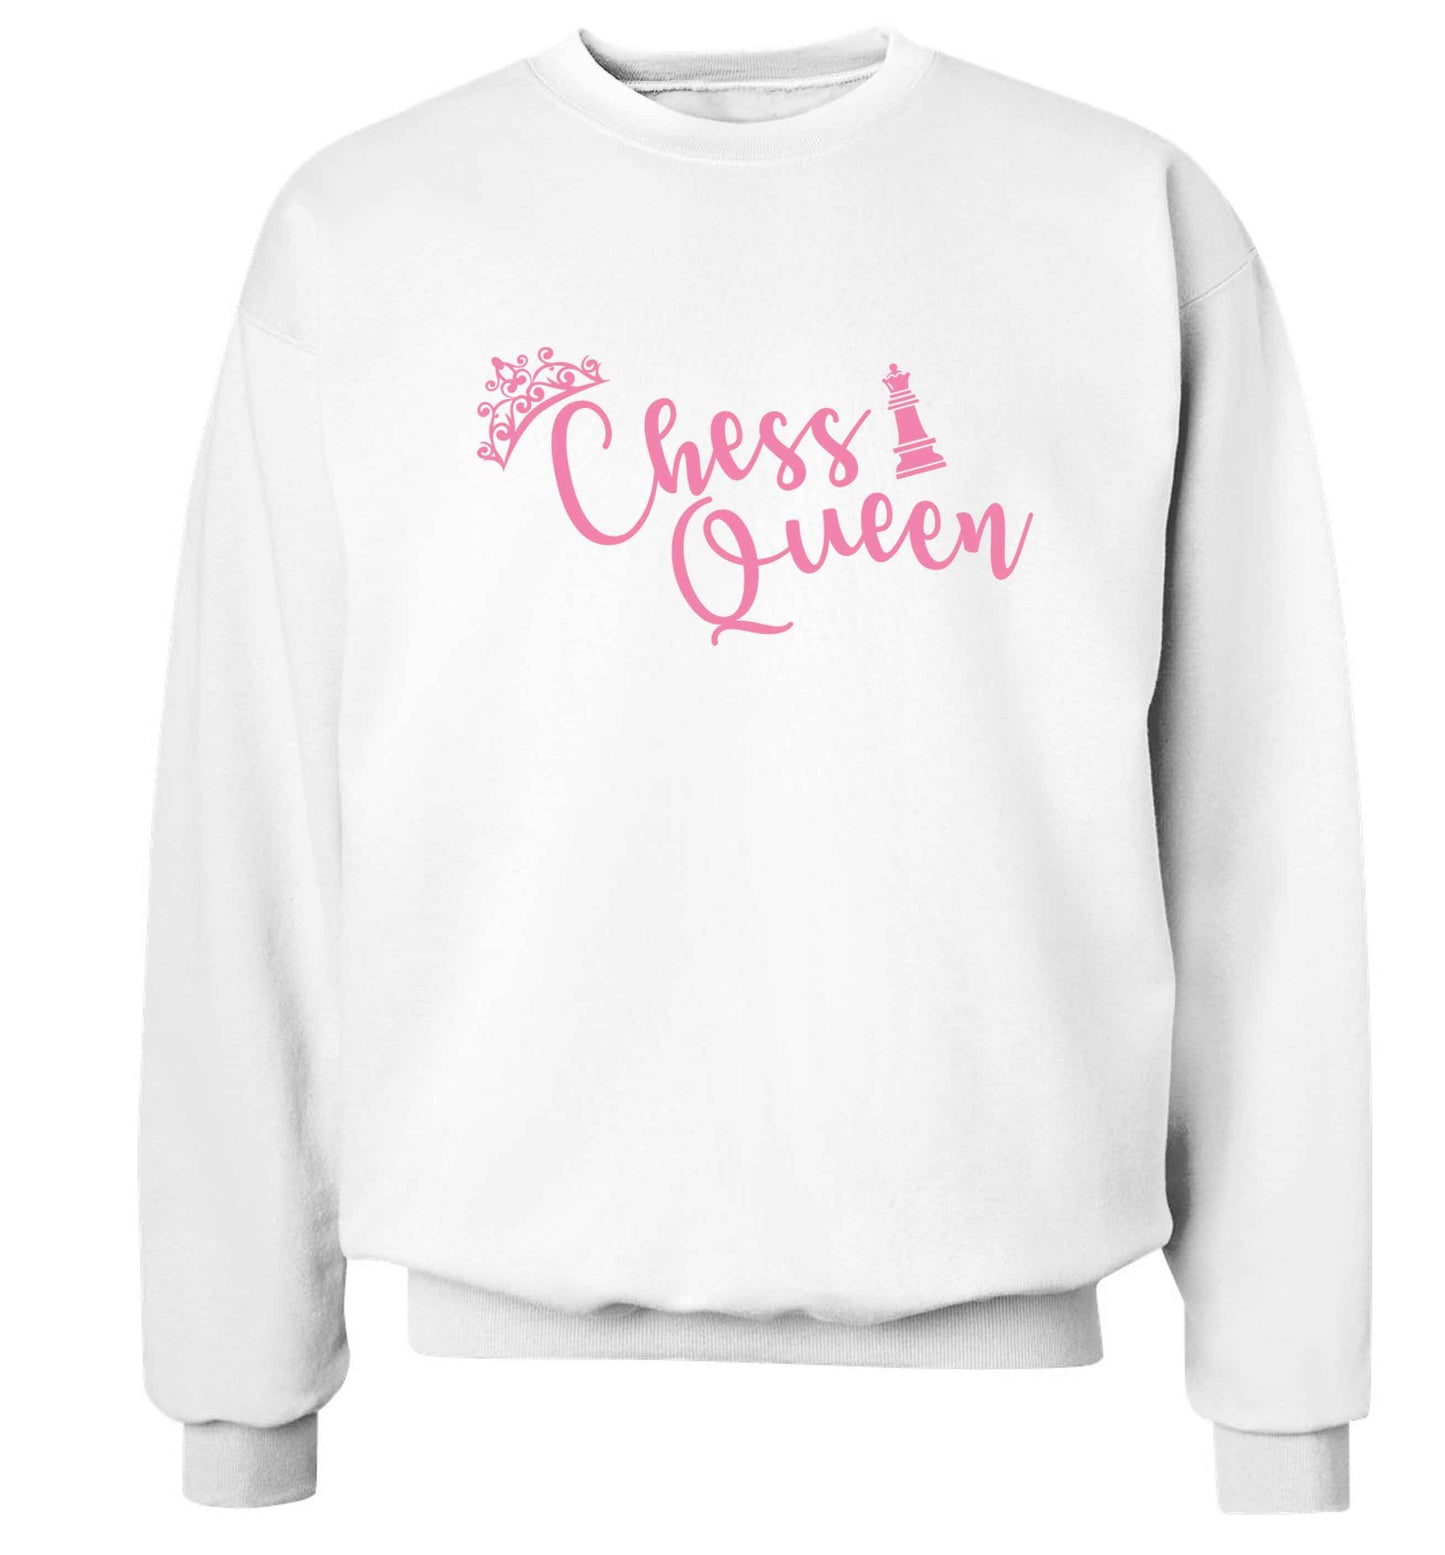 Pink chess queen  Adult's unisex white Sweater 2XL